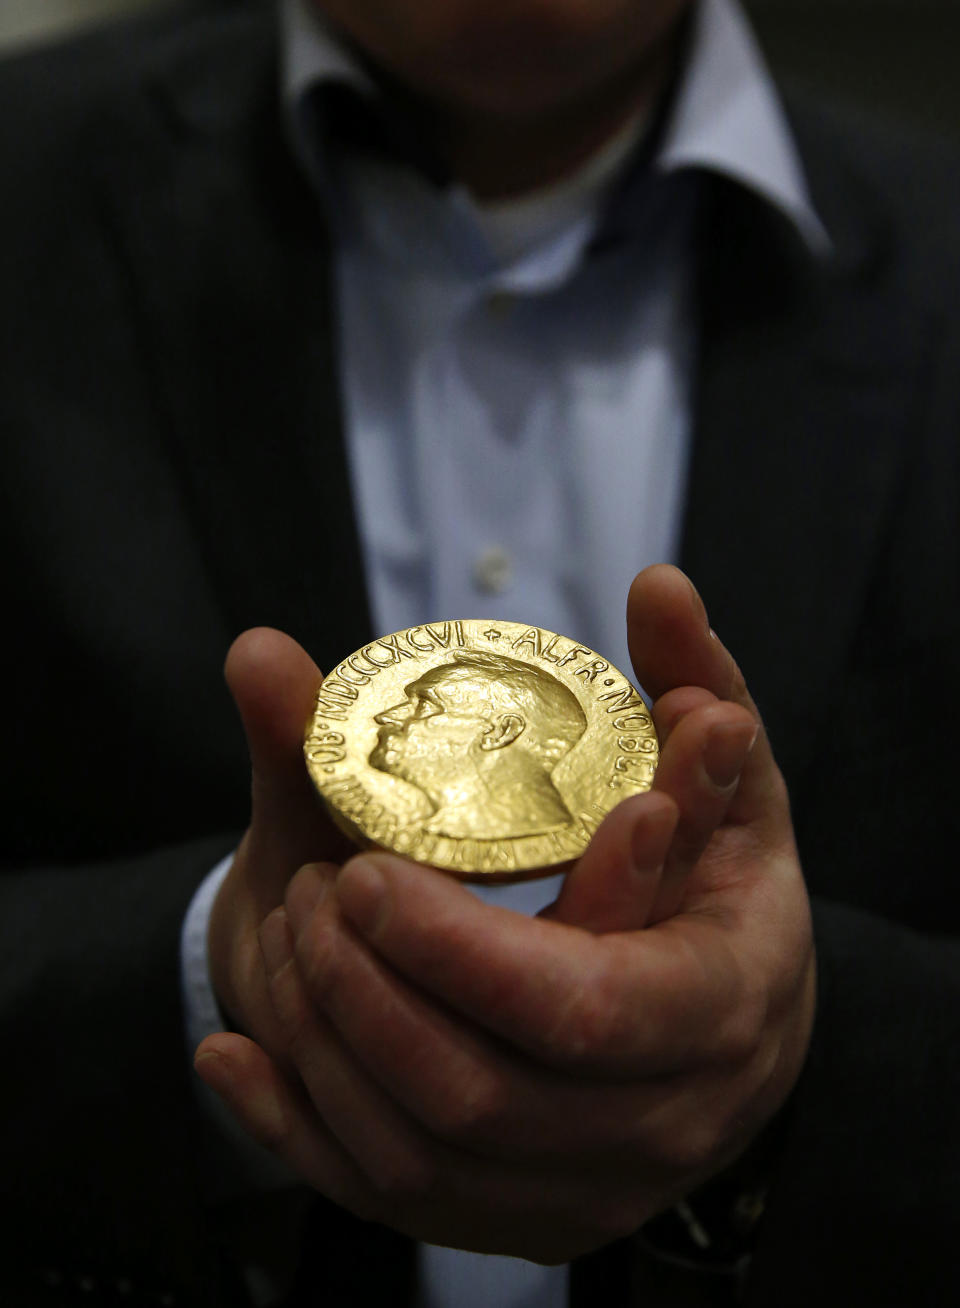 Bidder Ole Bjorn Fausa, of Norway, holds the 1936 Nobel Peace Prize medal in Baltimore, Thursday, March 27, 2014, the second Nobel Peace Prize ever to come to auction. The prize sold for a winning bid of $950,000 at auction, and an additional buyer’s commission brought the final sale price to $1.16 million. The recipient was Argentina's foreign minister, Carlos Saavedra Lamas, who was honored for his role in negotiating the end of the Chaco War between Paraguay and Bolivia. (AP Photo/Patrick Semansky)